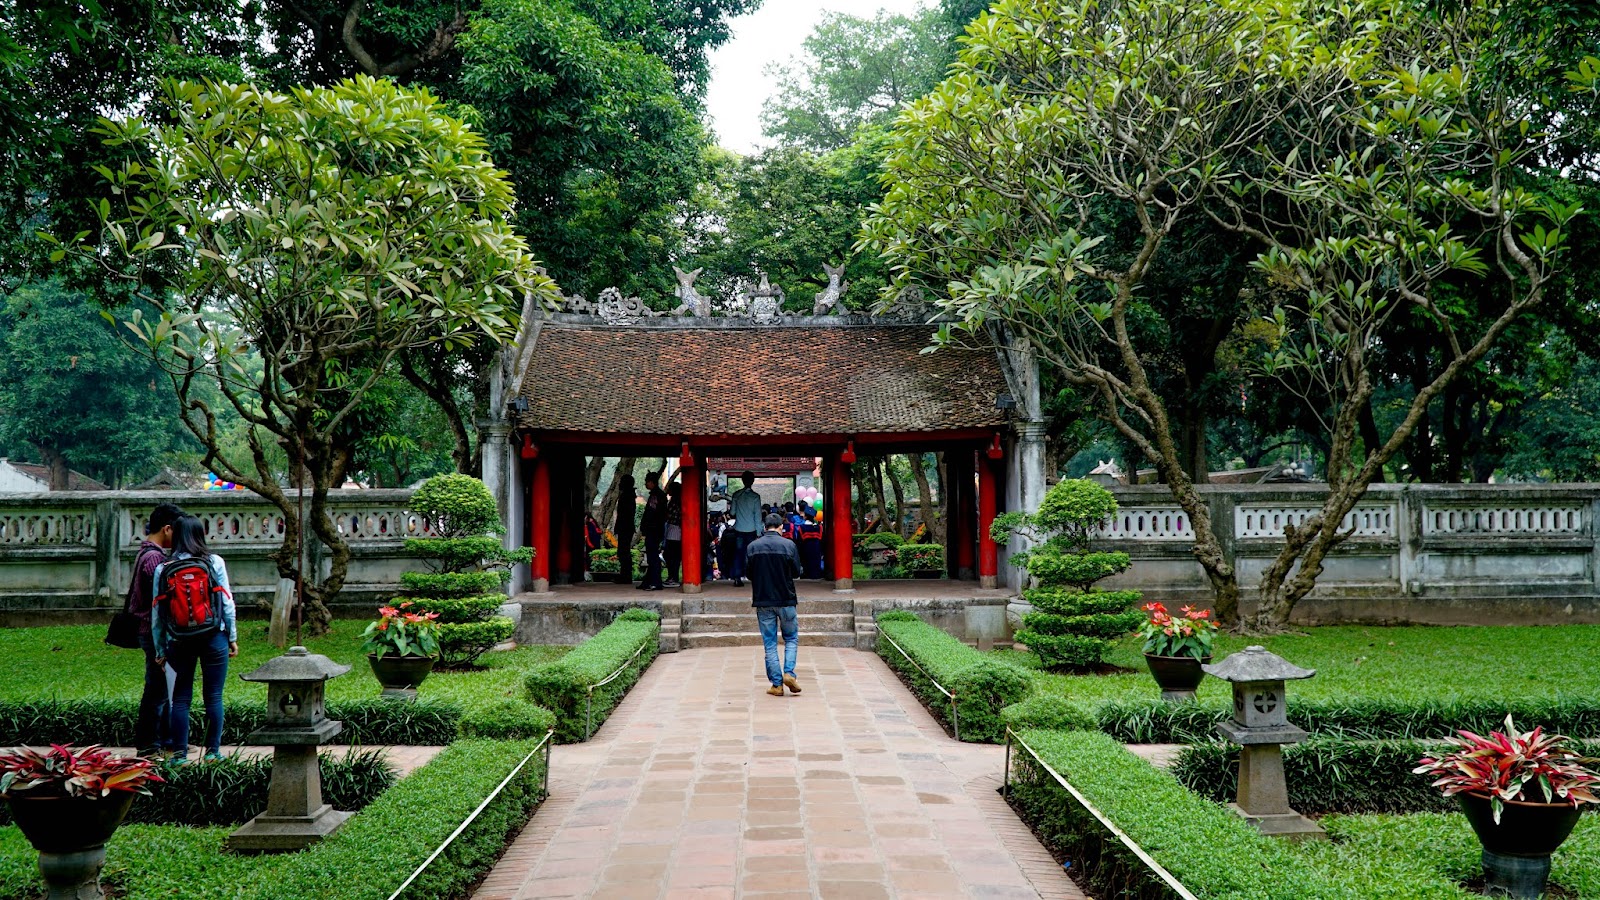 The well kept gardens inside Temple of Literature